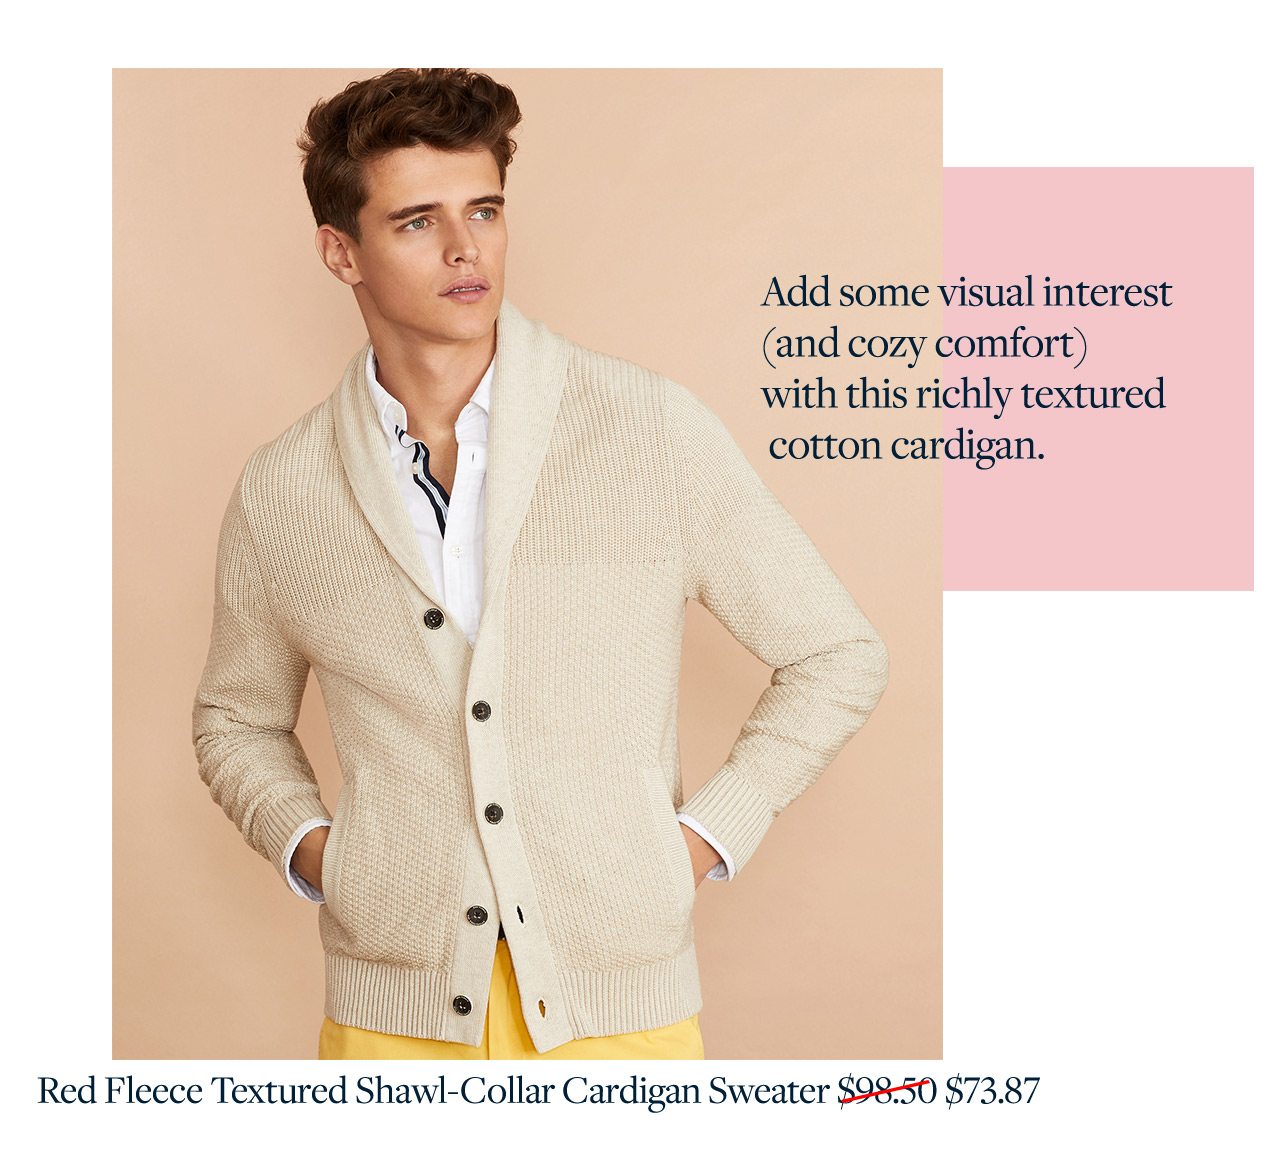 Add some visual interest (and cozy comfort) with this richly textured cotton cardigan.